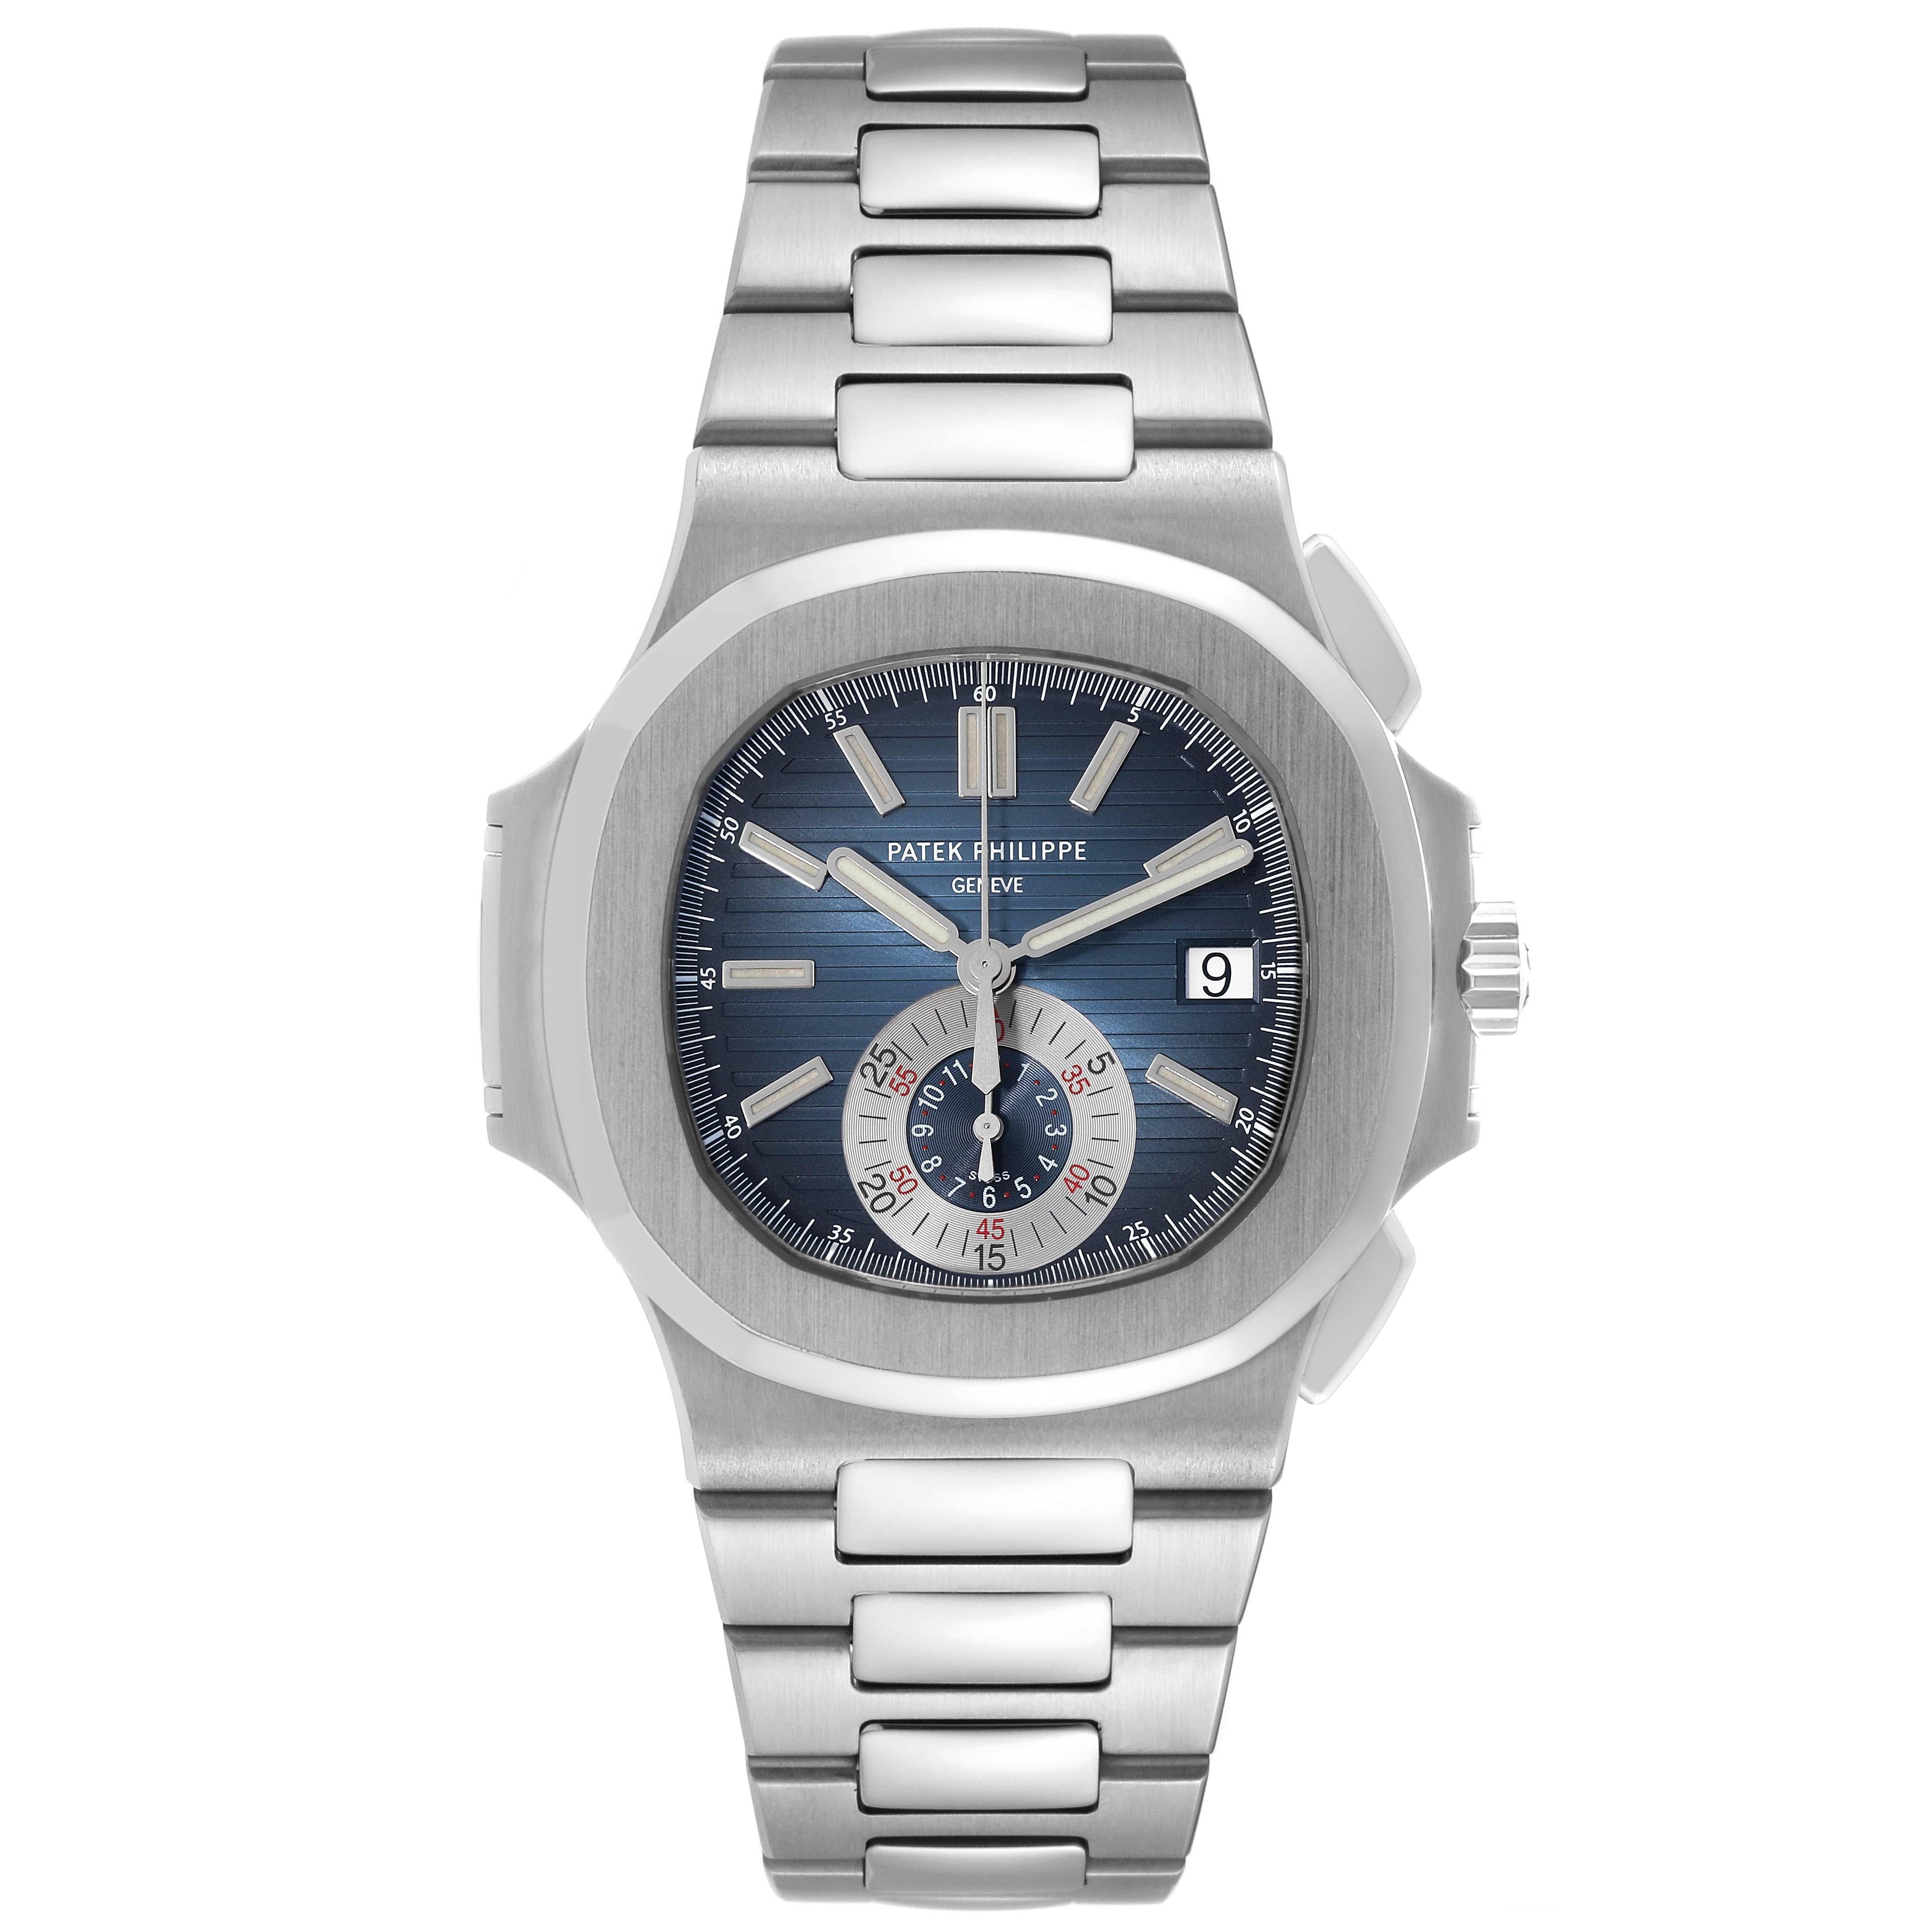 Patek Philippe Nautilus Blue Dial Steel Mens Watch 5980 Box Papers. Automatic self-winding chronograph movement. Stainless steel cushion shaped case 40.5 mm. Transparent exhibition sapphire crystal caseback. Stainless steel bezel. Scratch resistant